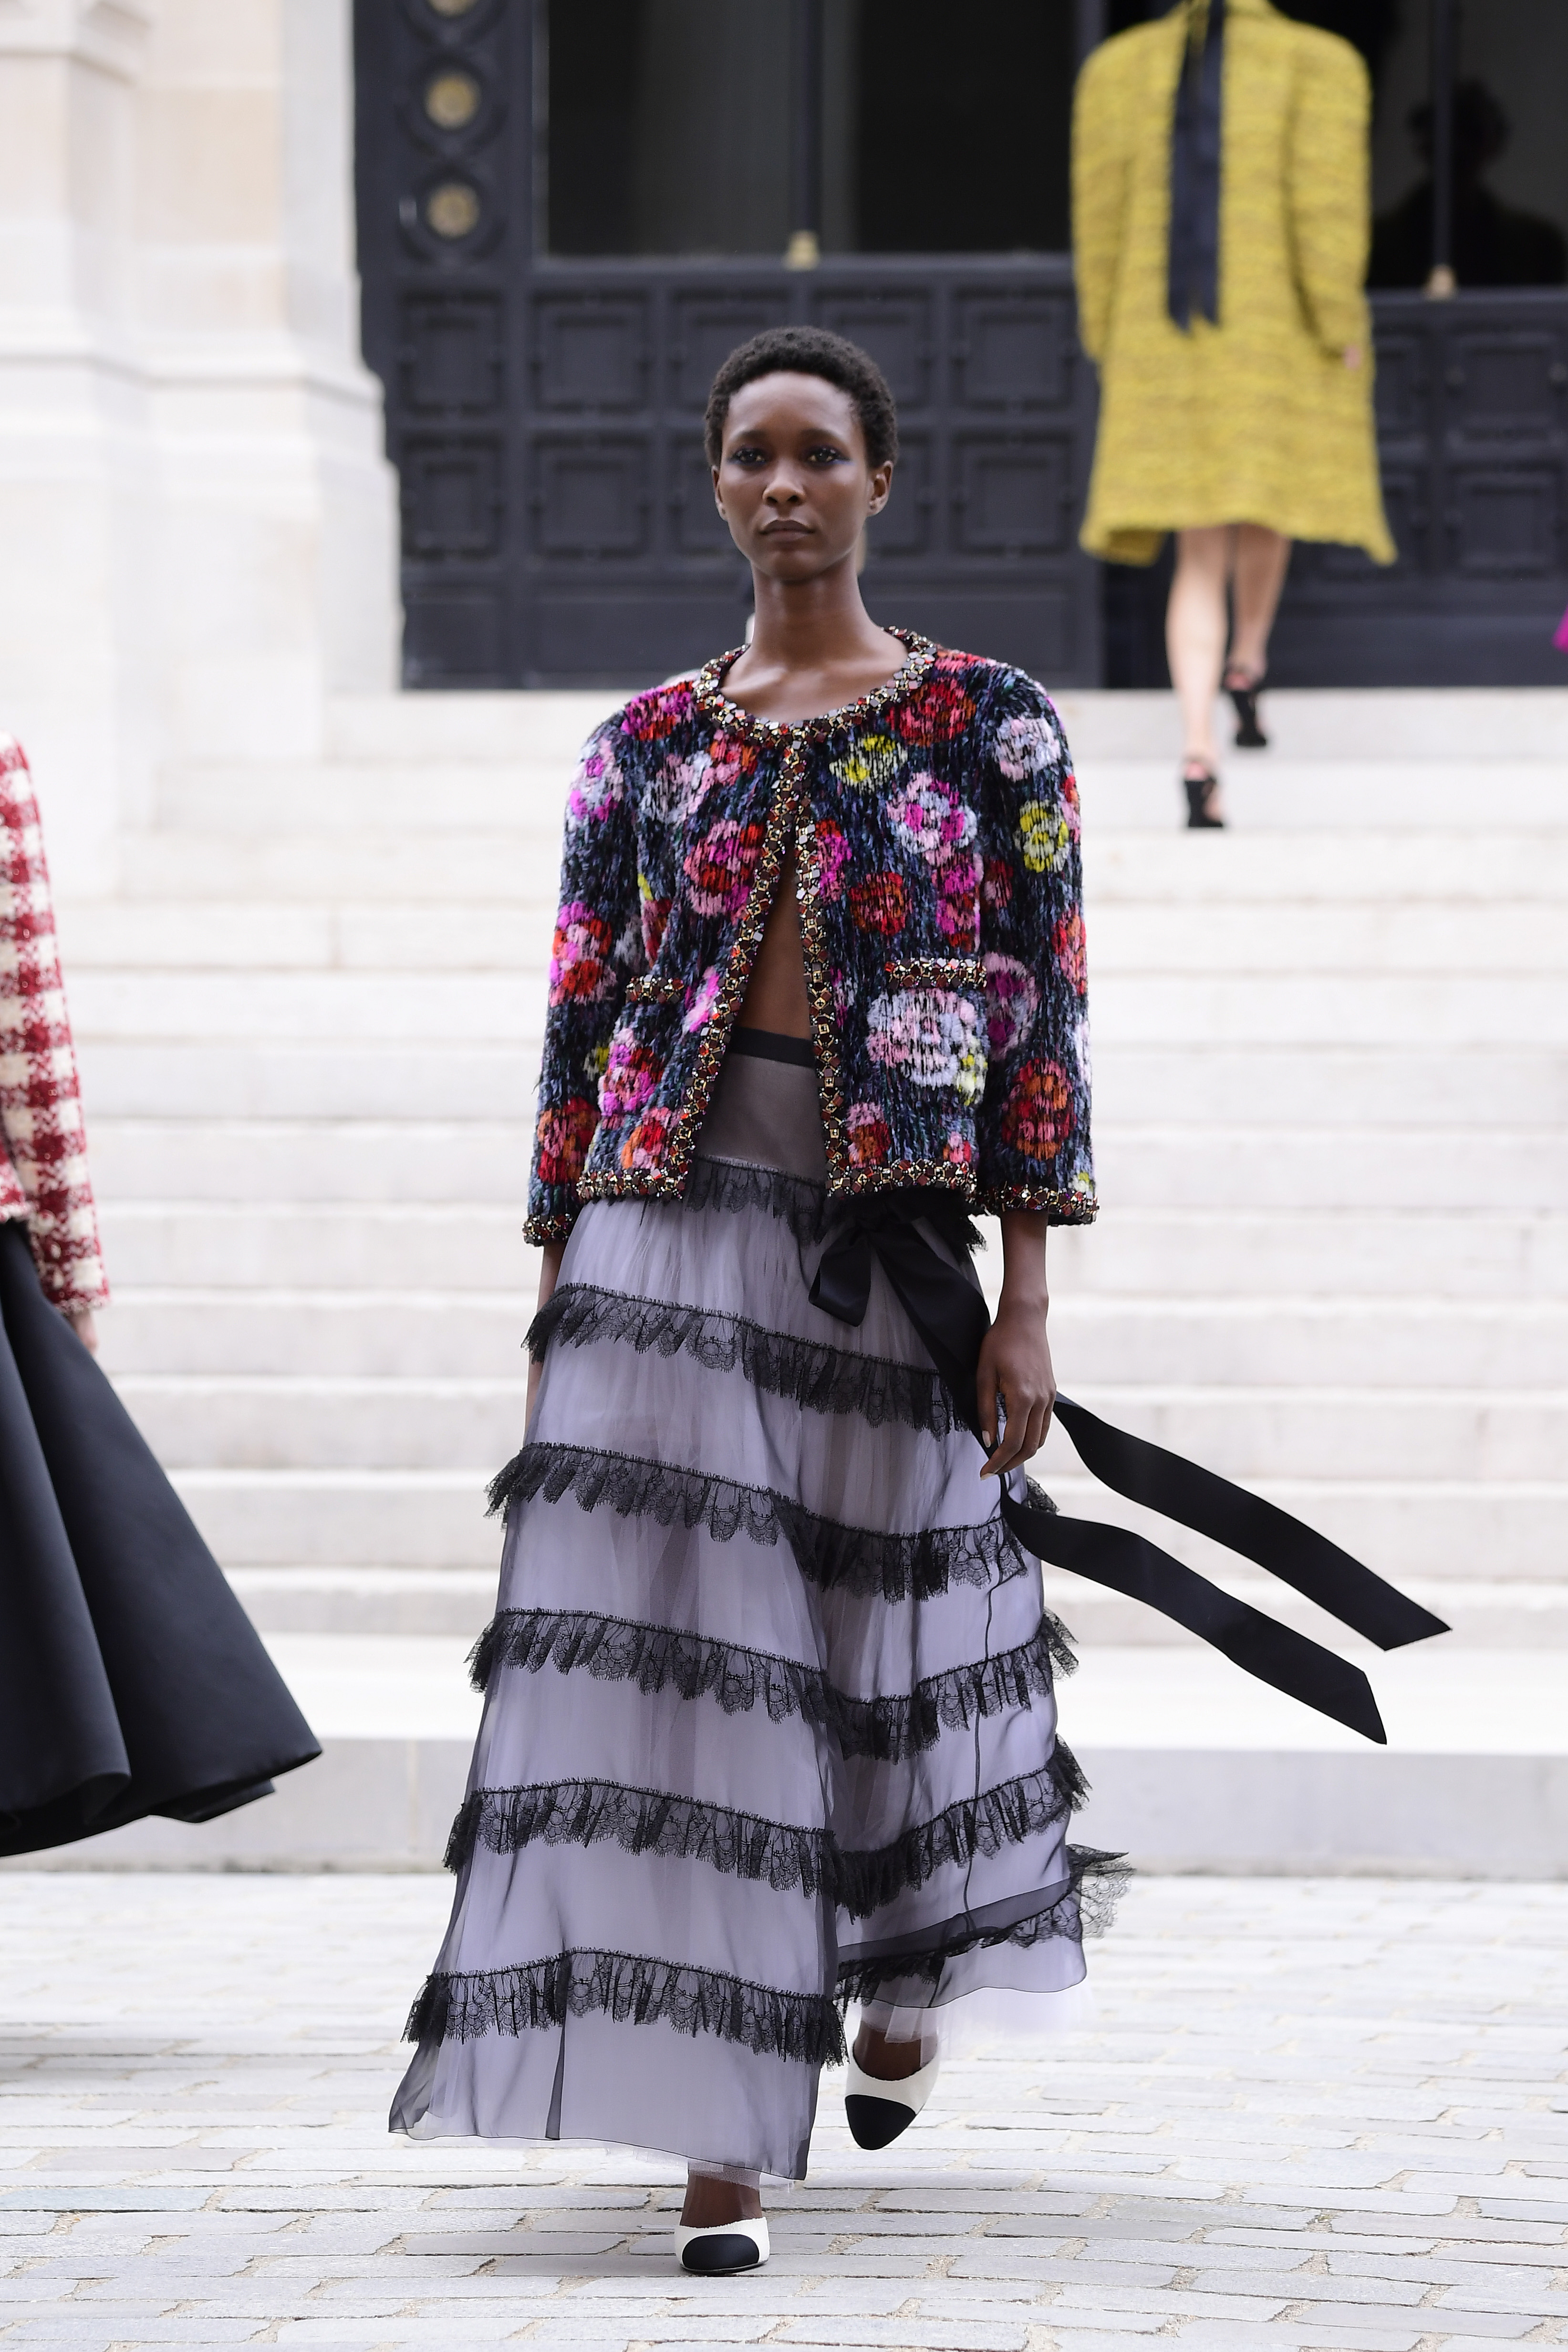 Chanel Haute Couture Fall Winter 2021-2022 - RUNWAY MAGAZINE ® Official